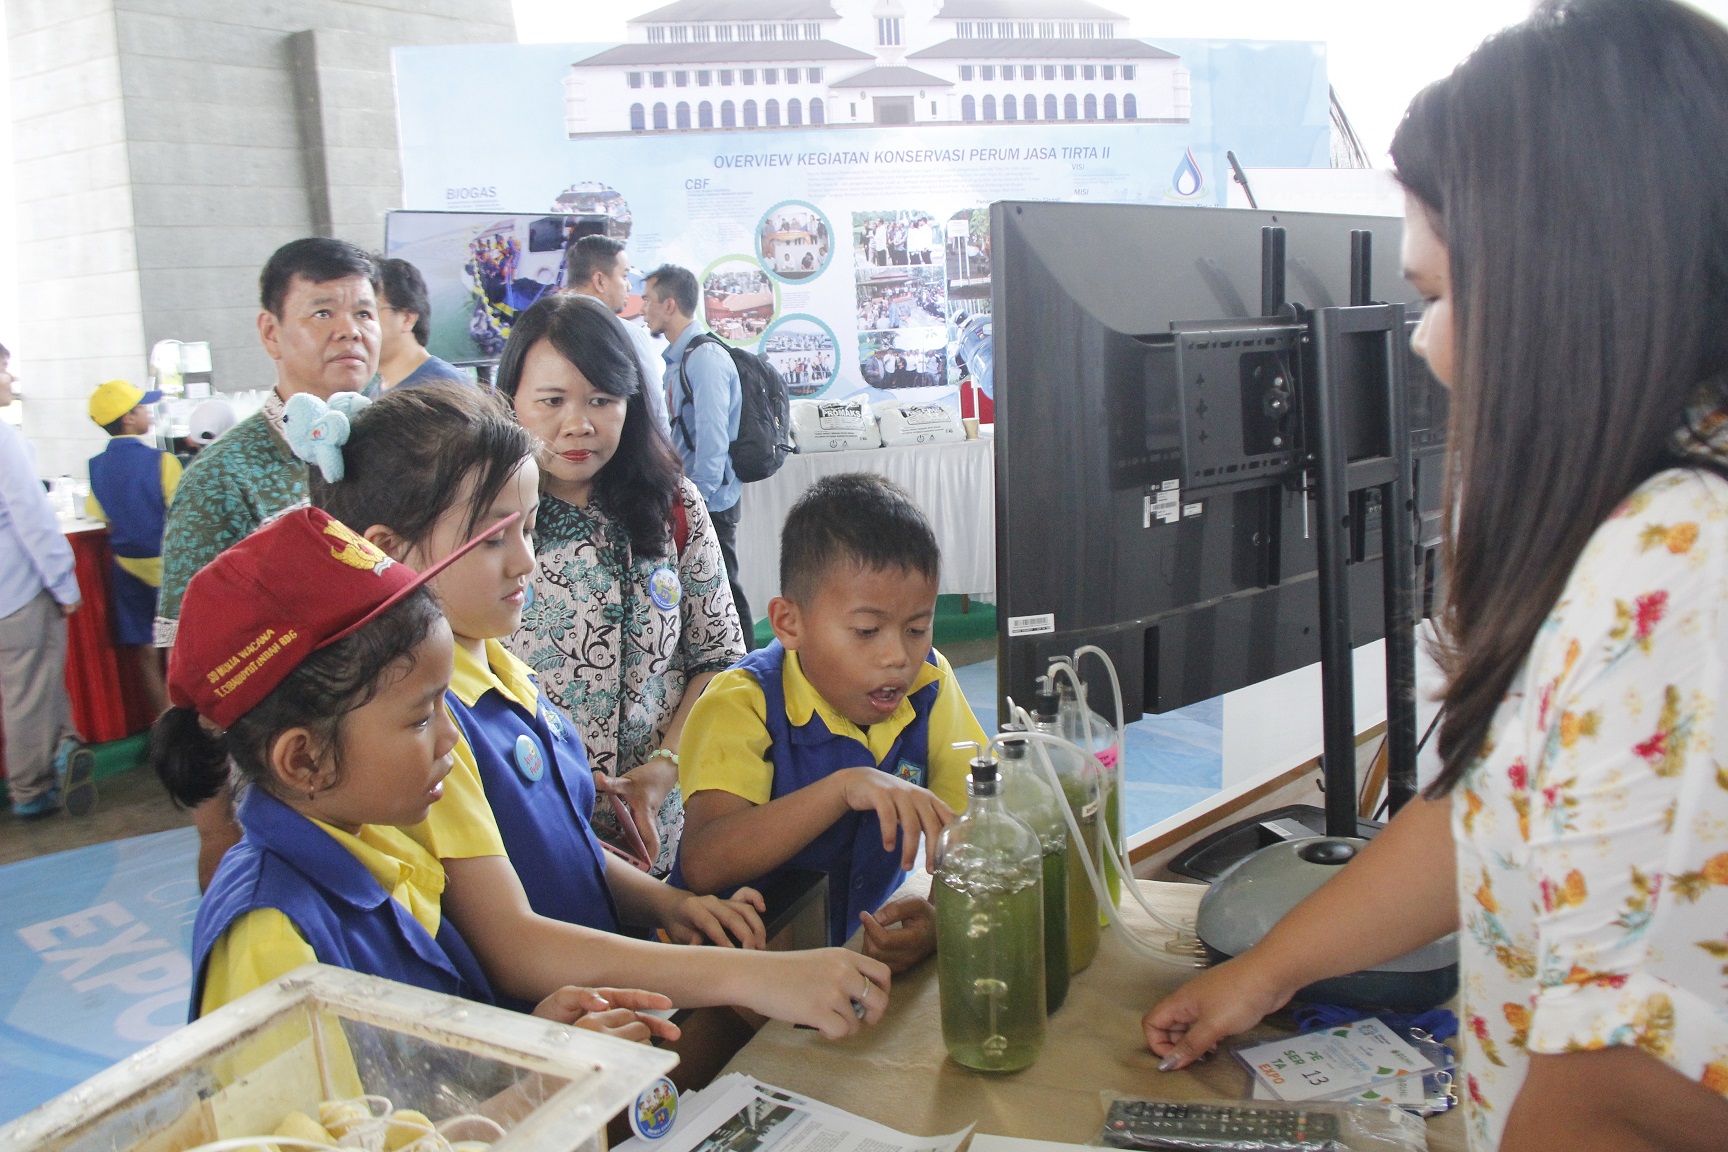 itb-displayed-research-and-community-service-products-in-citarum-expo-2019